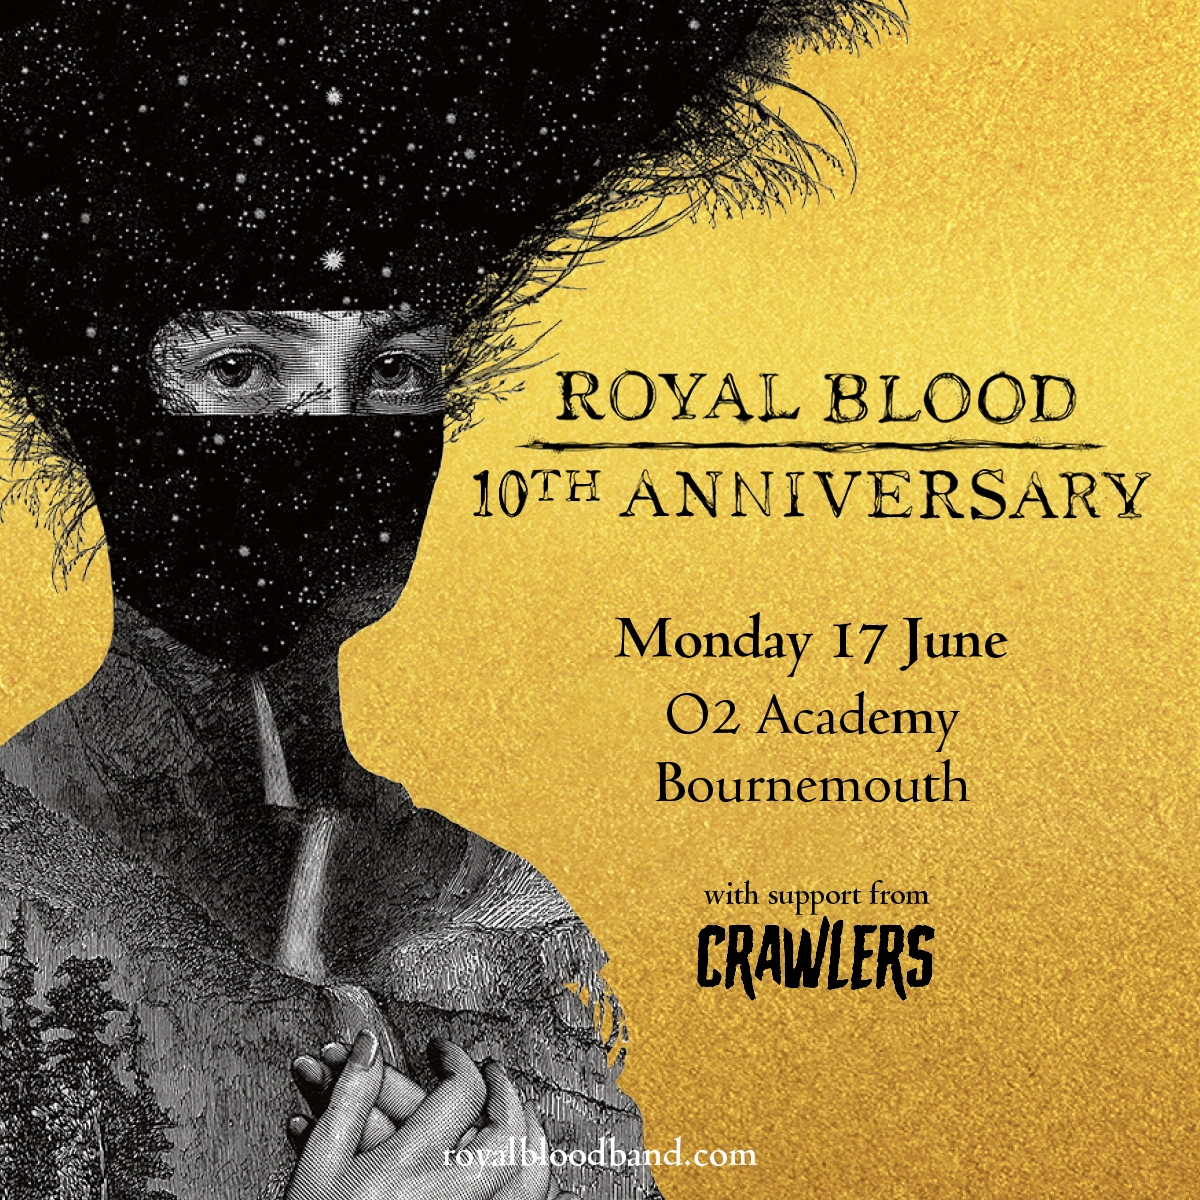 Royal Blood in der O2 Academy Bournemouth Tickets